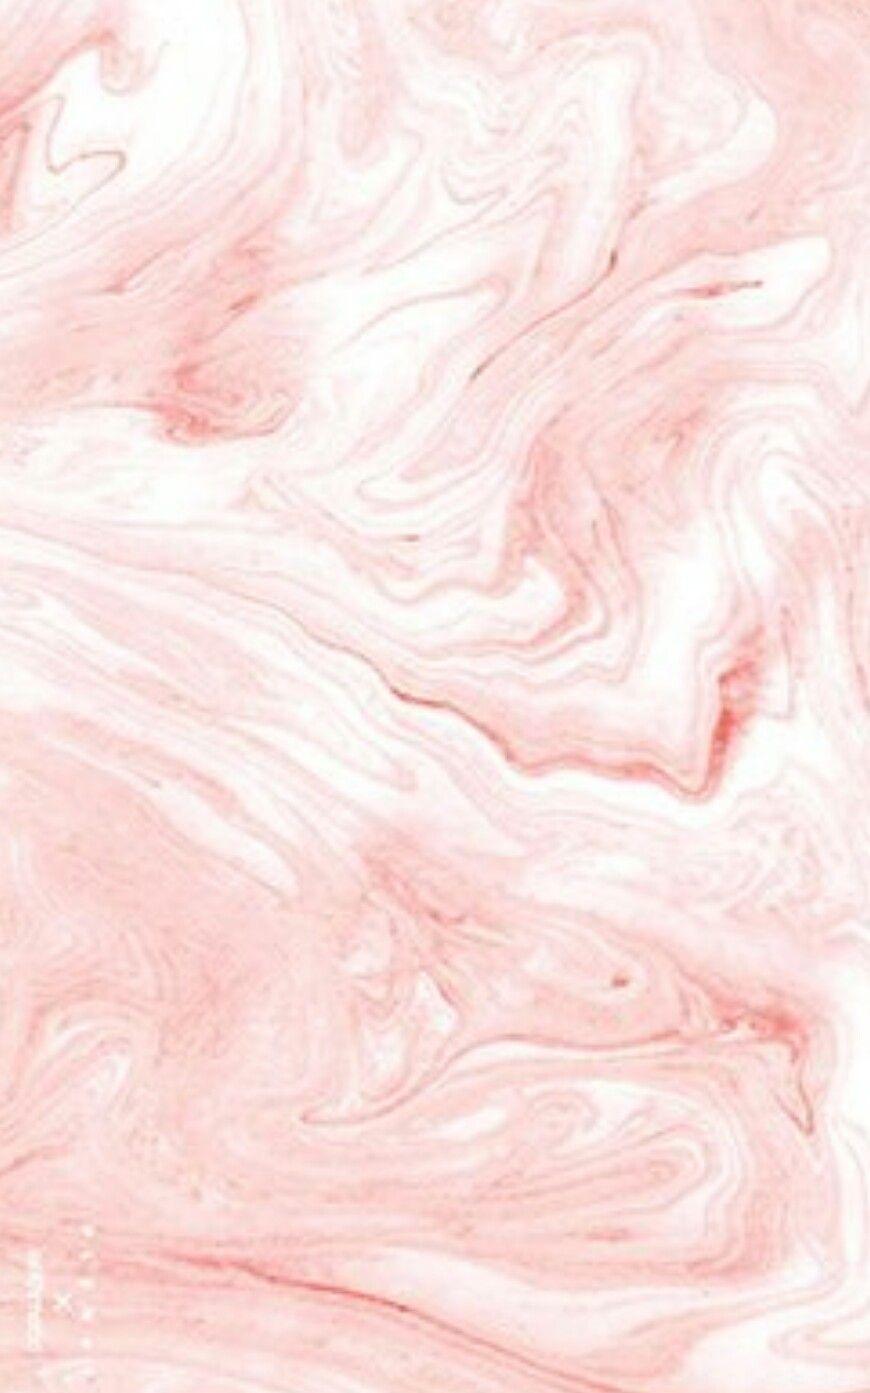 Get the elegant and luxurious Background pink marble Images and videos